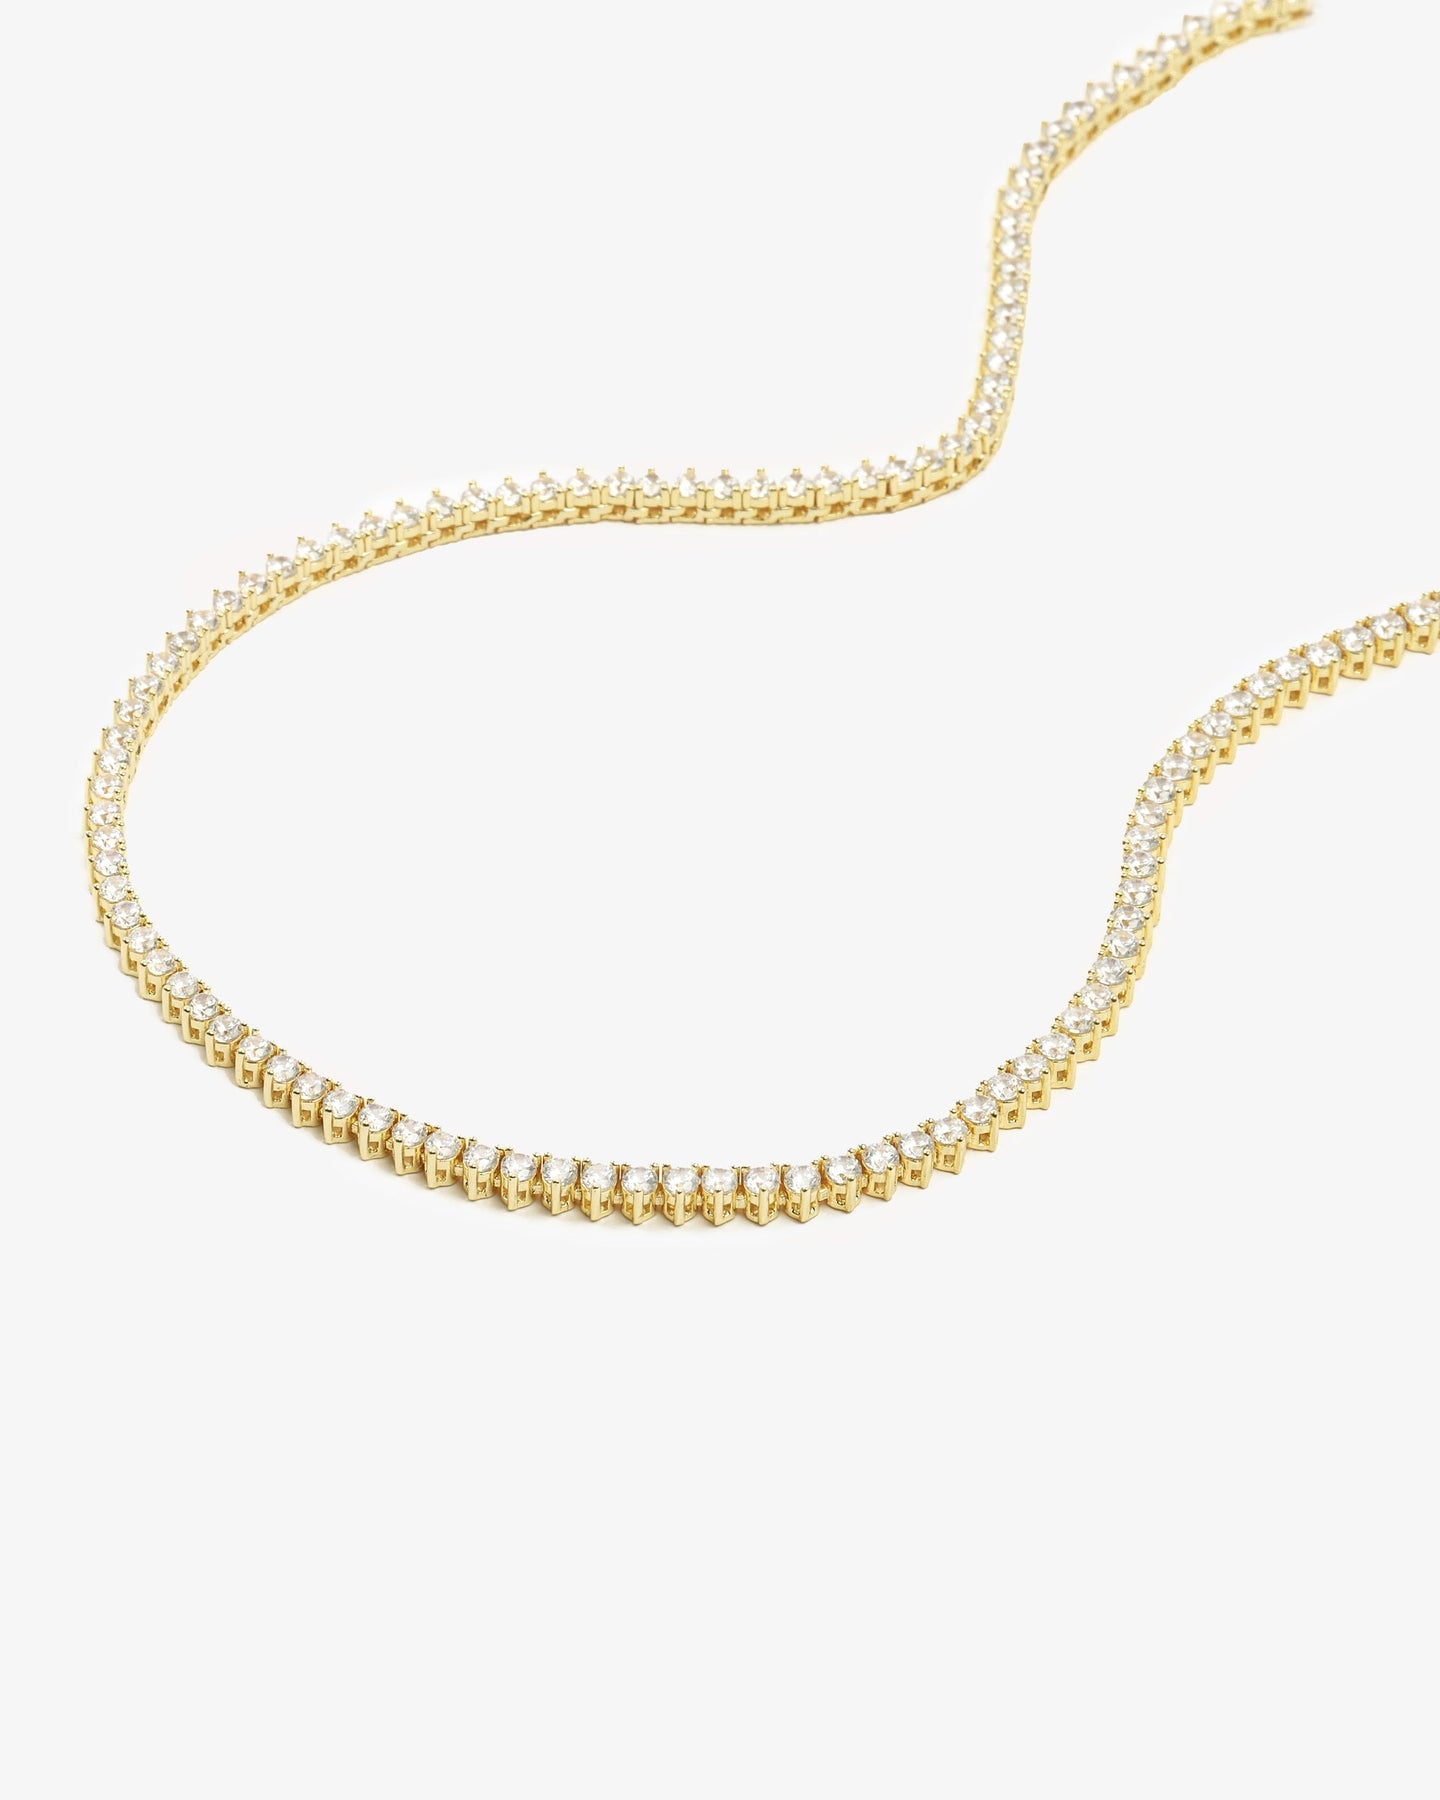 Not Your Basic Tennis Necklace 16" Gold